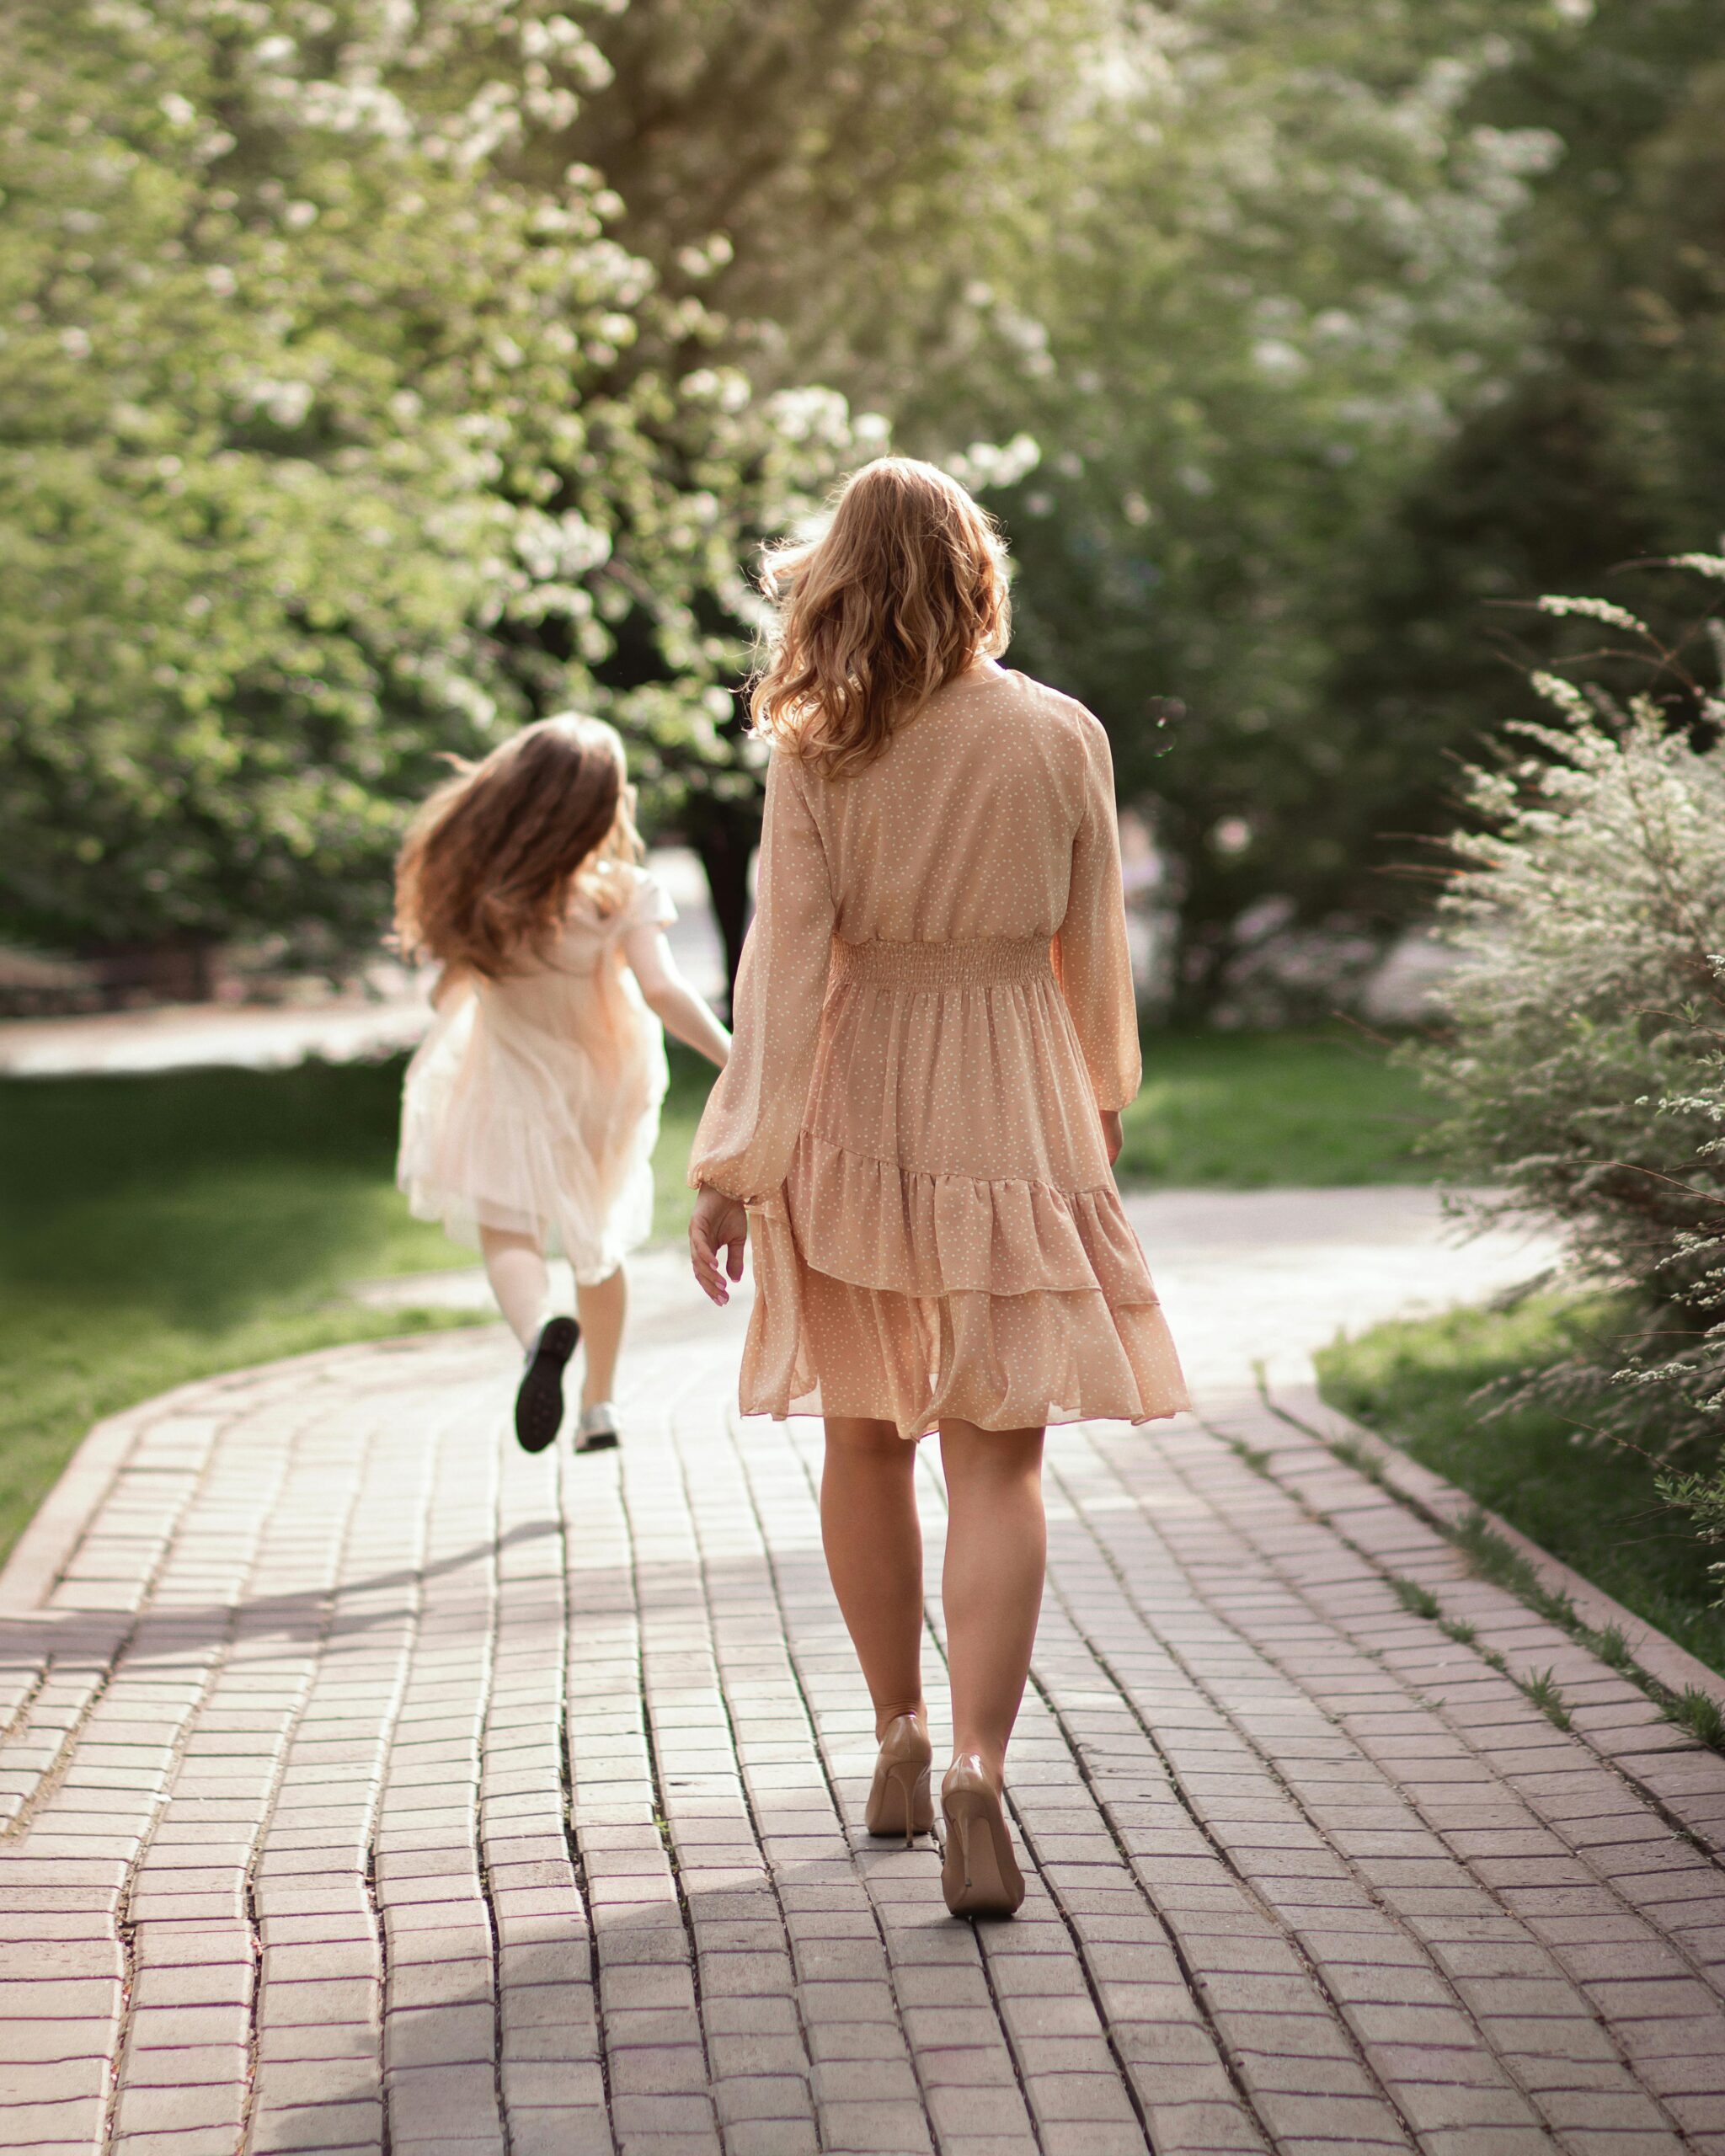 Woman and girl walking on paved path